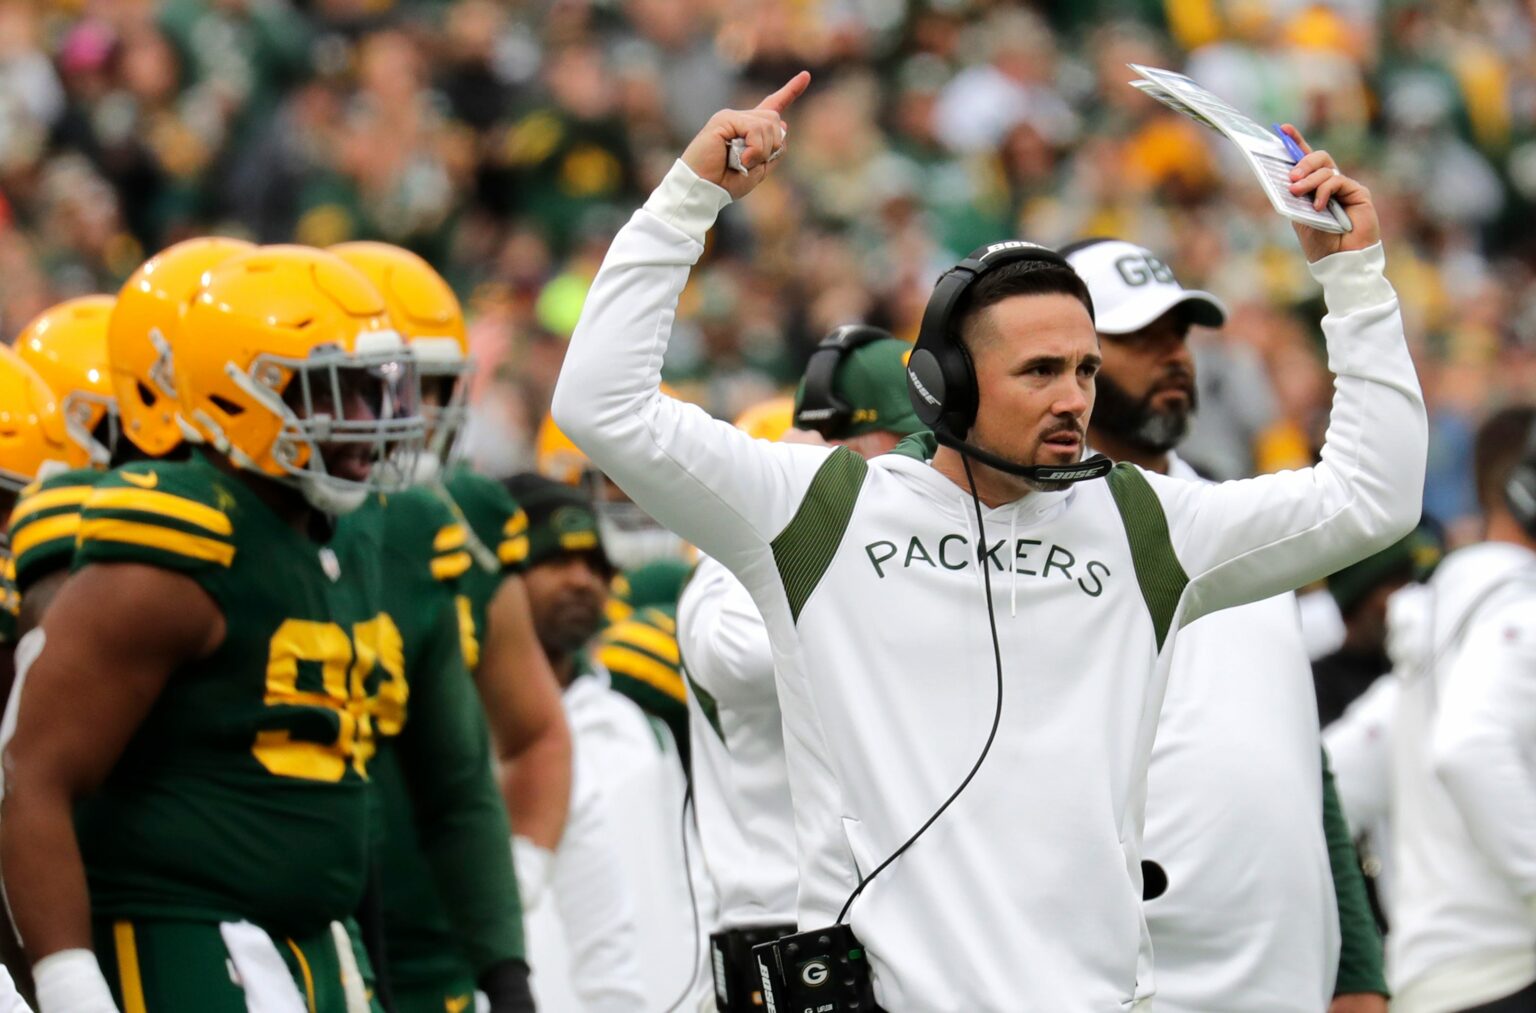 Green Bay Packers head coach Matt LaFleur encourages the crowd to get loud against the Washington Football Team during their football game Sunday, October 24, 2021, at Lambeau Field in Green Bay, Wis. Dan Powers/USA TODAY NETWORK-Wisconsin